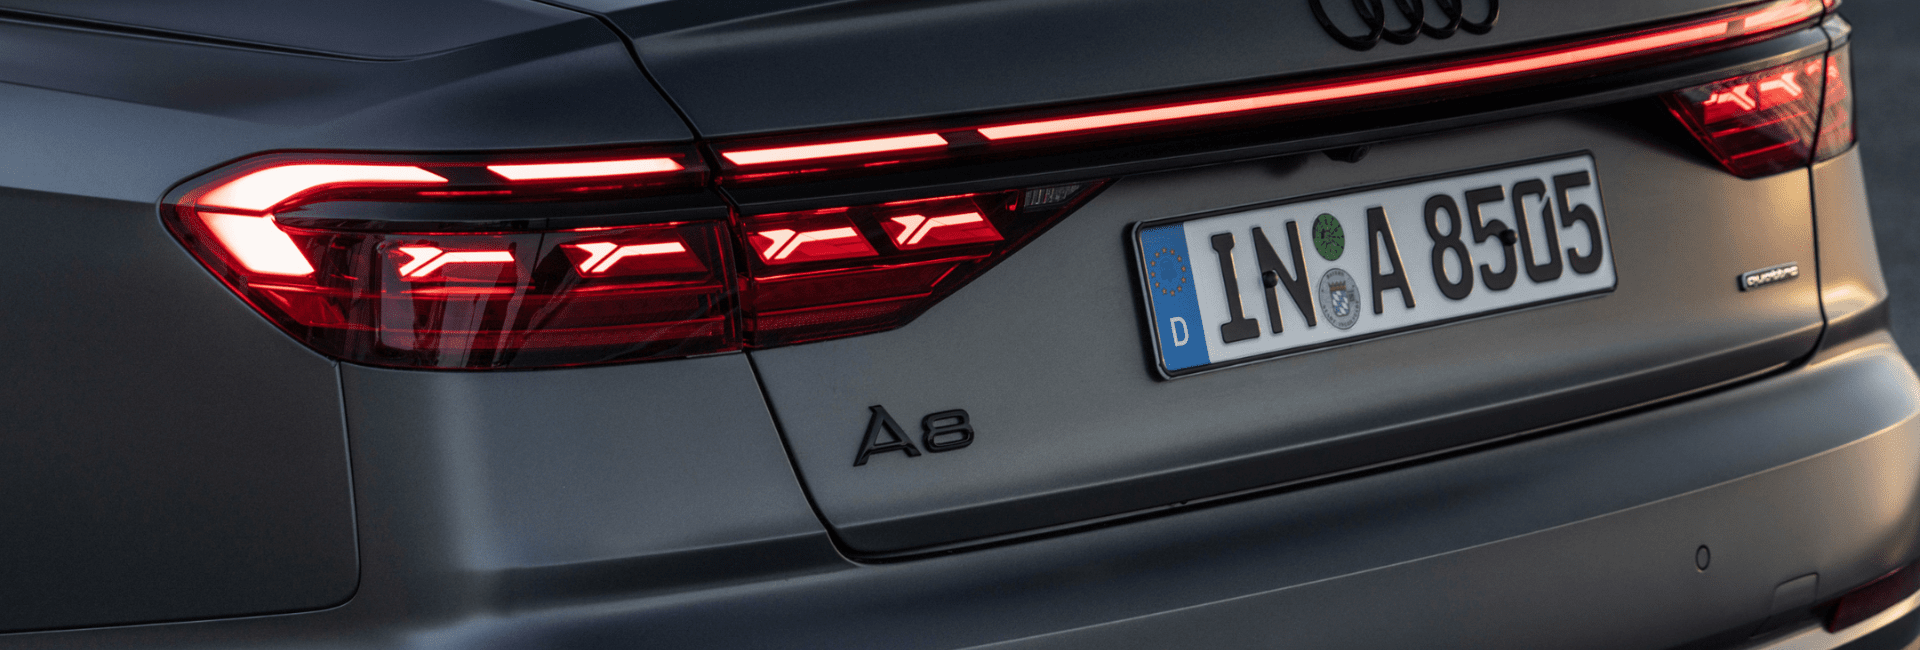 OLEDWorks is Supplier of Digital OLED Tail Lights in the Updated Audi A8